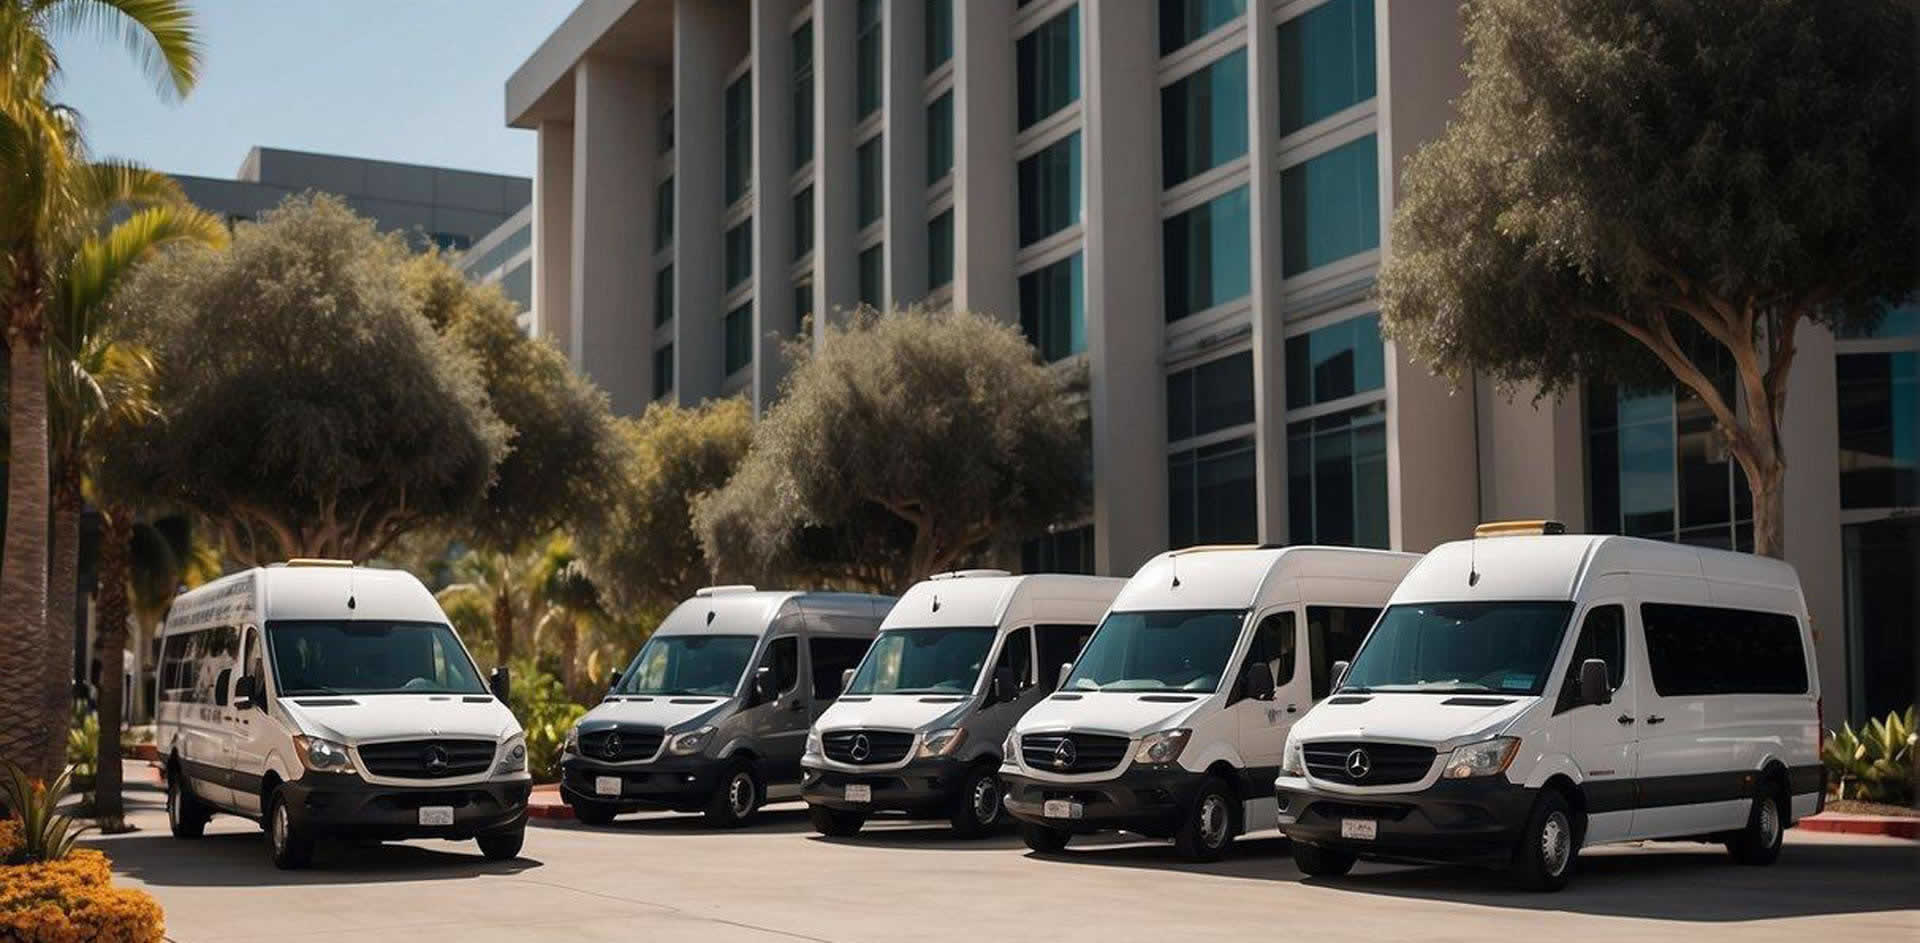 Luxury vans and buses line up in front of a corporate office building in San Diego, ready to transport executives in style and comfort